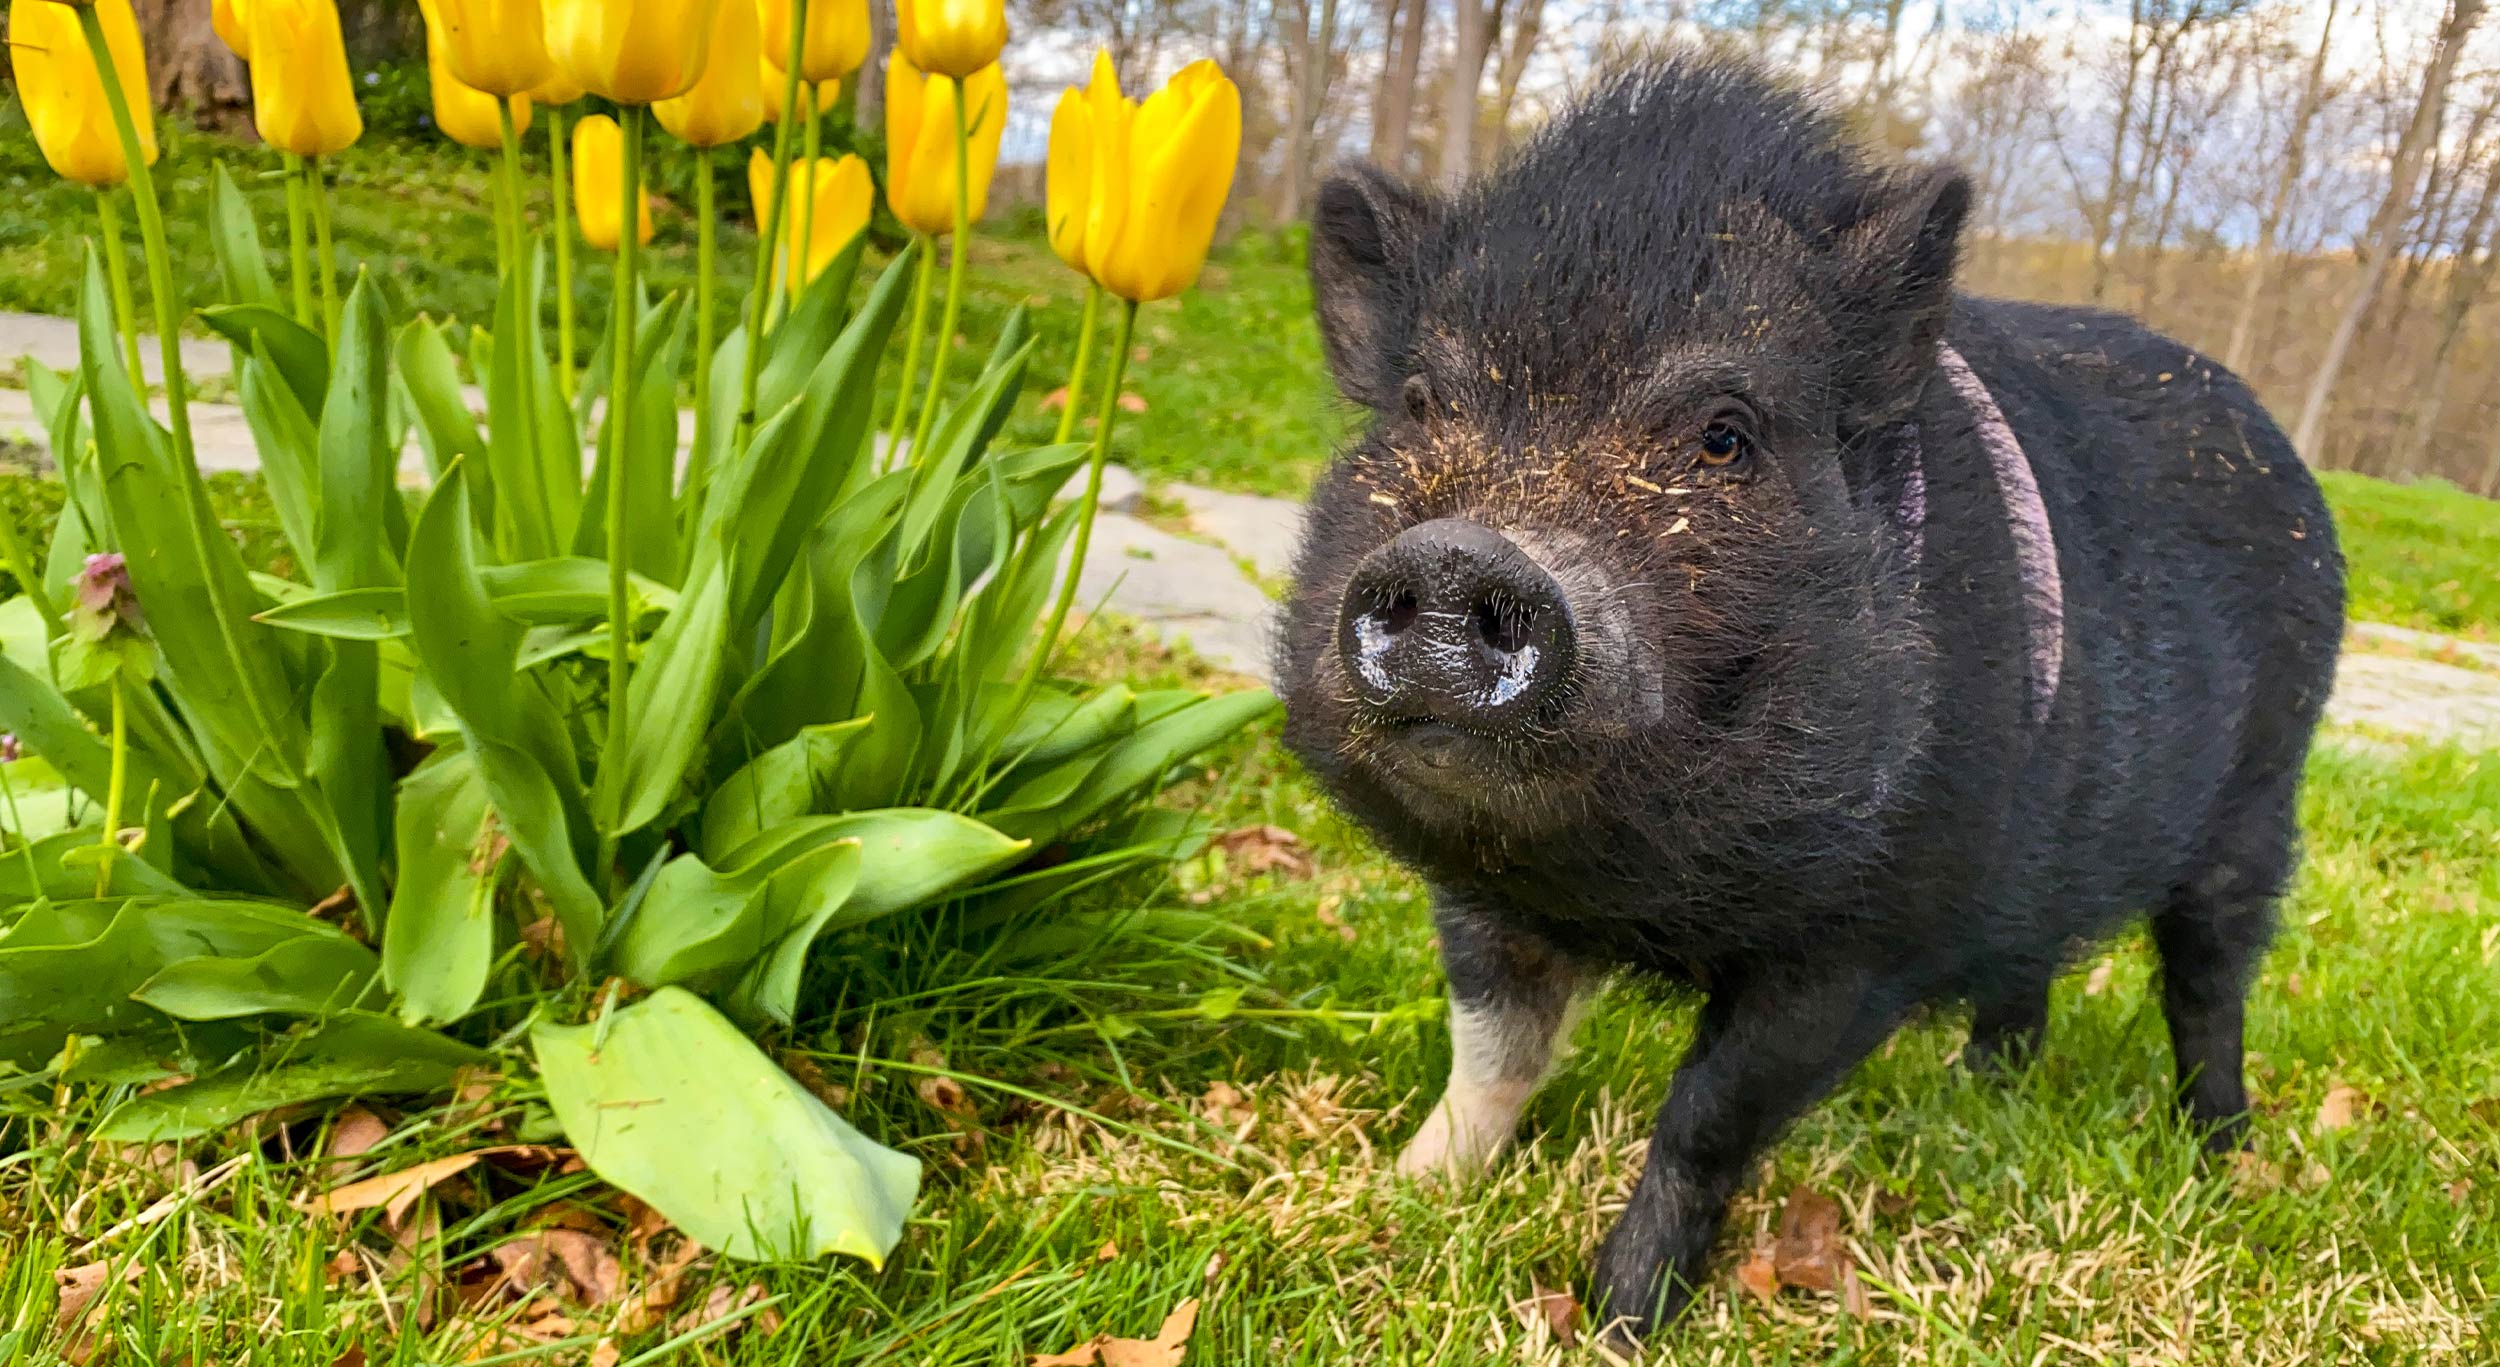 Mary Piggins - the first pet therapy pig at Piggins and Banks